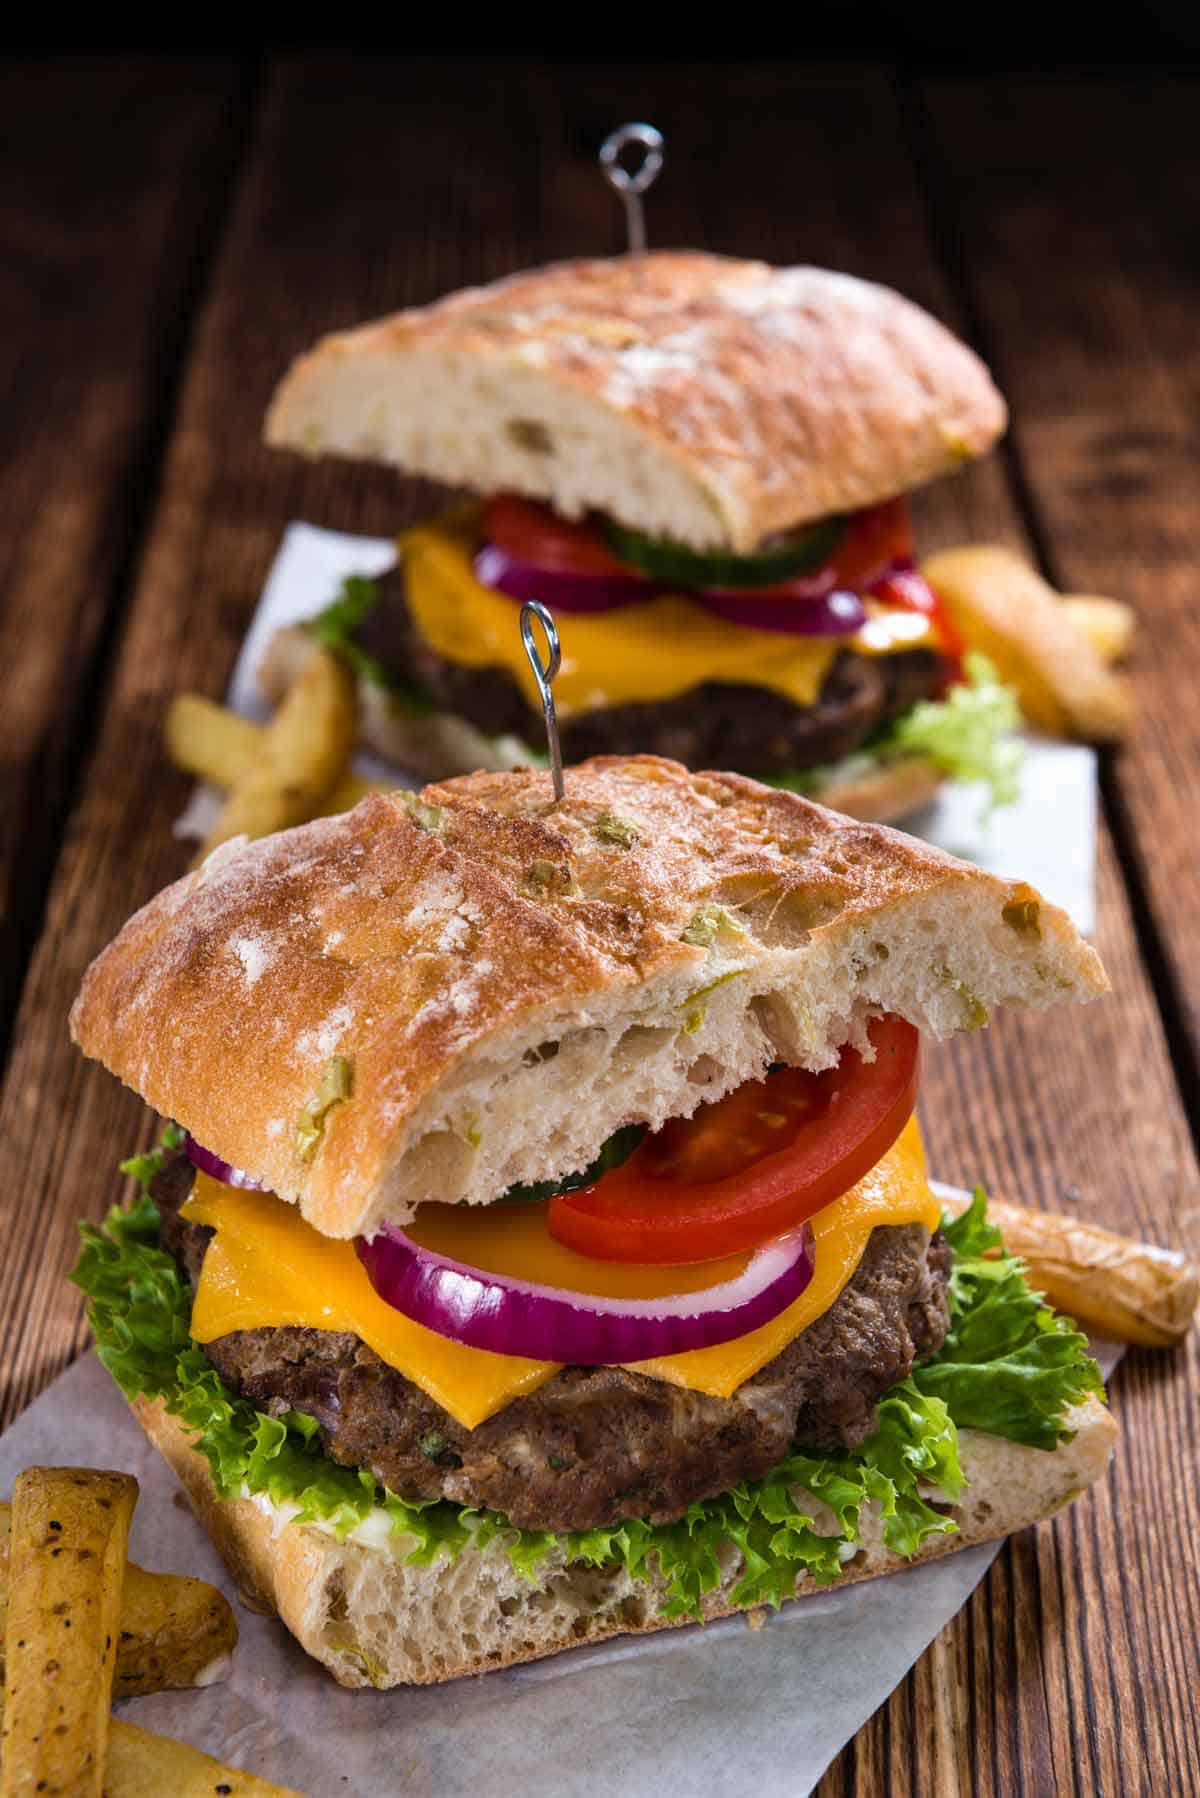 Ciabatta bread burger with lettuce, beef, cheese, red onion, and tomato.